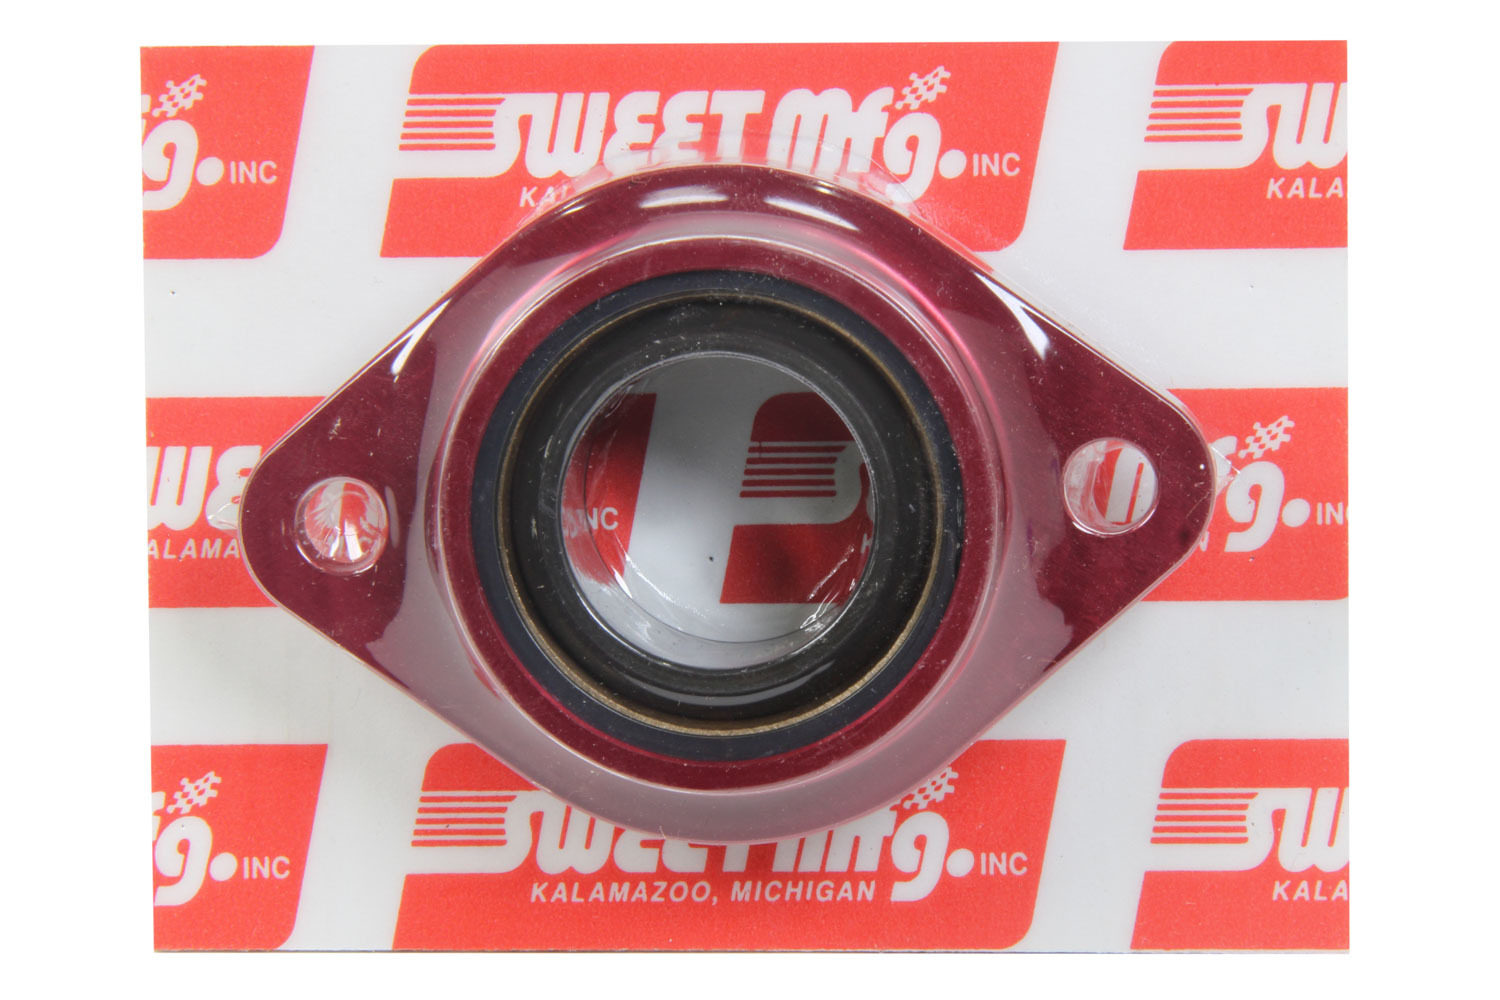 Sweet Manufacturing 405-10425 Flange Bearing, Steering Shaft / Firewall Mount, 1-1/8 in Spherical Bearing Bore, Aluminum, Red Anodized, Each